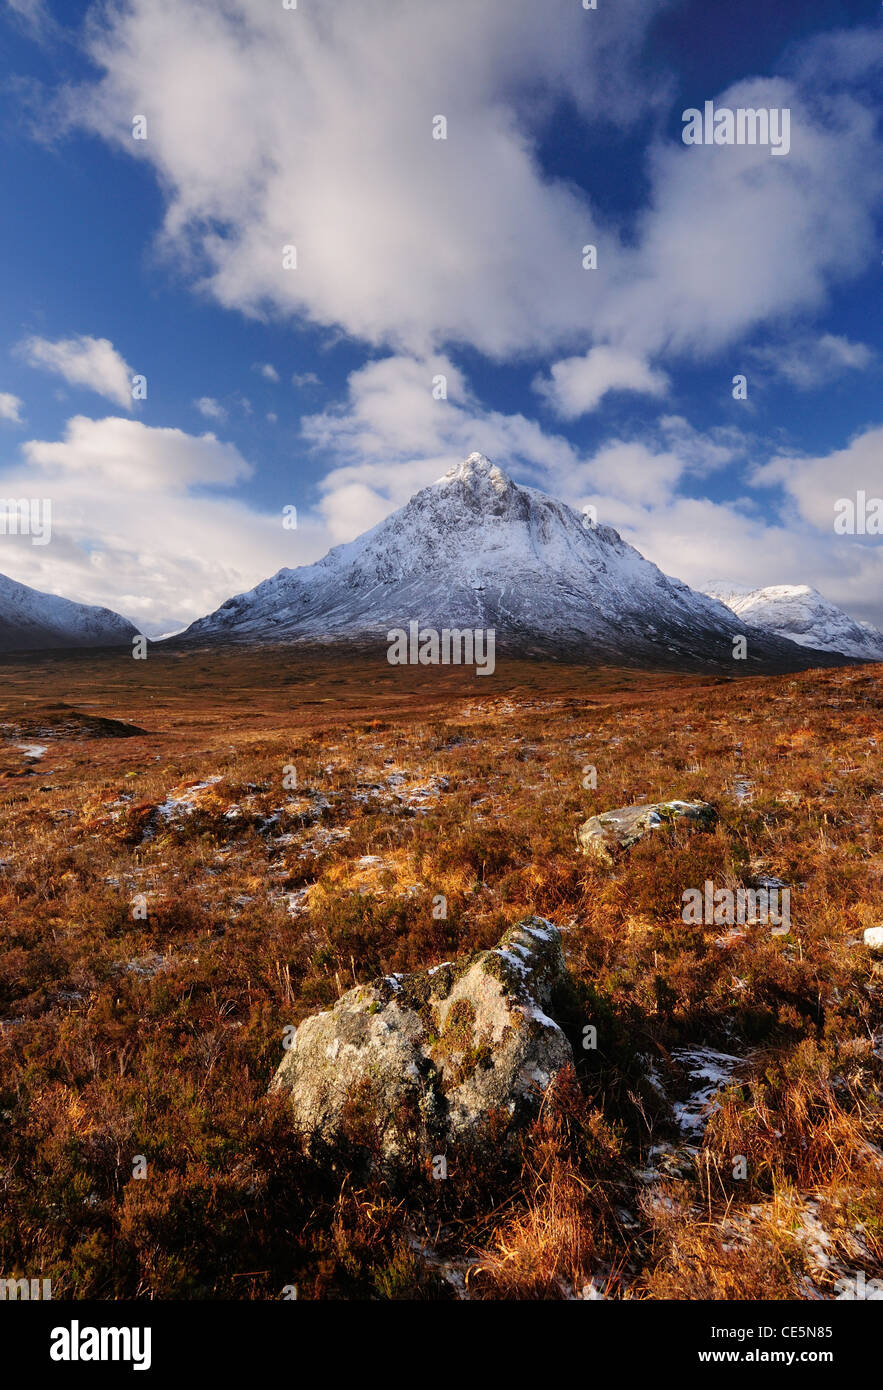 Rocks in Glencoe with the snow capped peak of Stob Dearg on Buachaille Etive Mor in the background, Scottish Highlands, Scotland Stock Photo